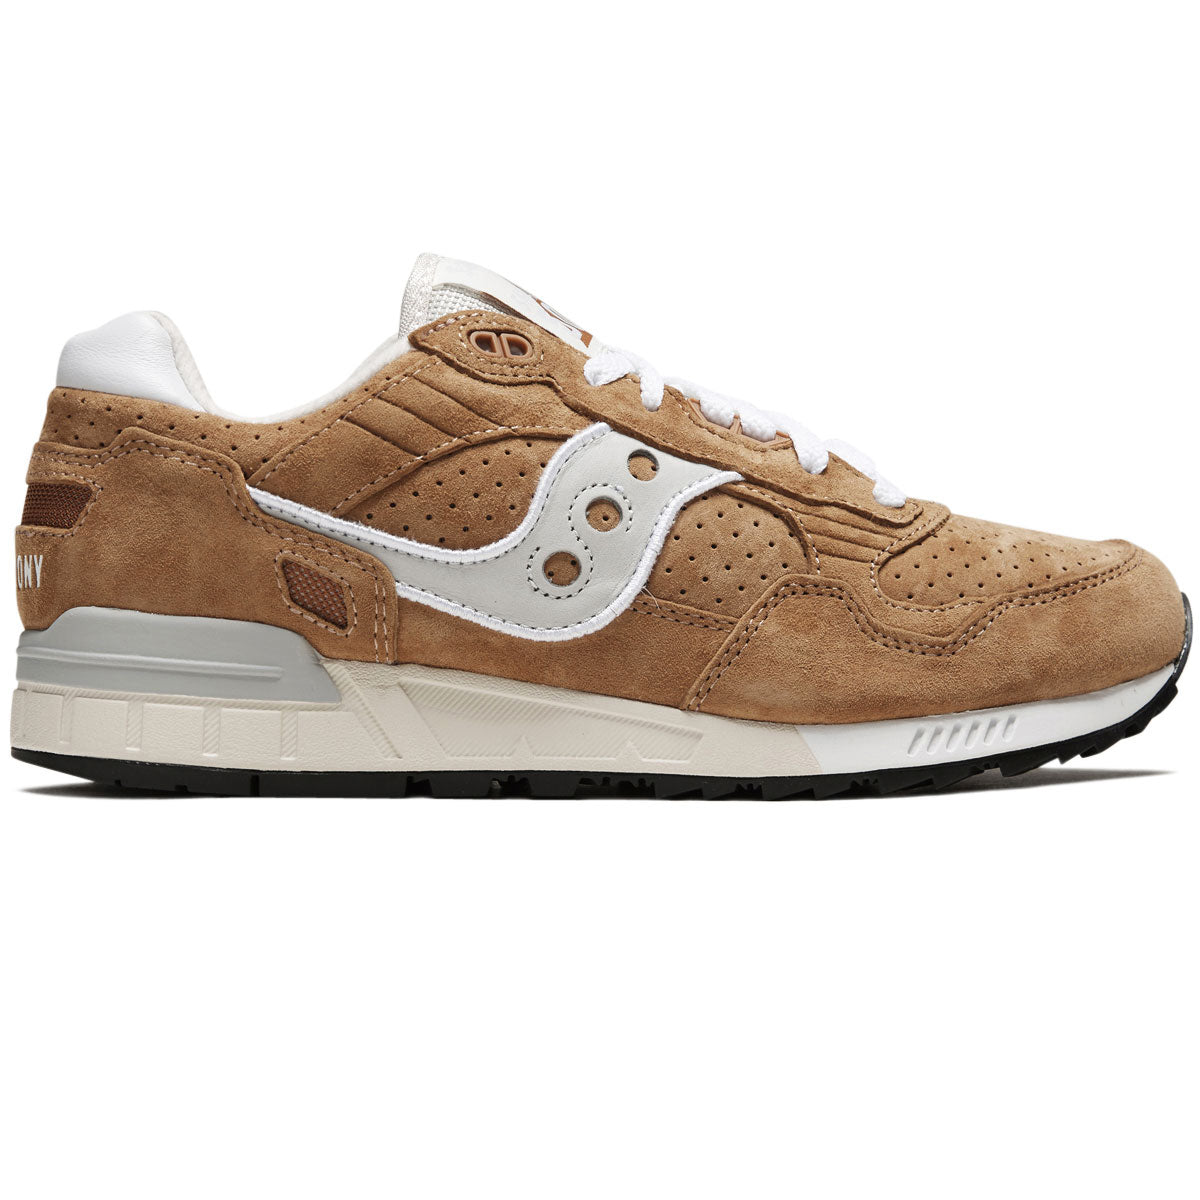 Saucony Shadow 5000 Shoes - Rust image 1